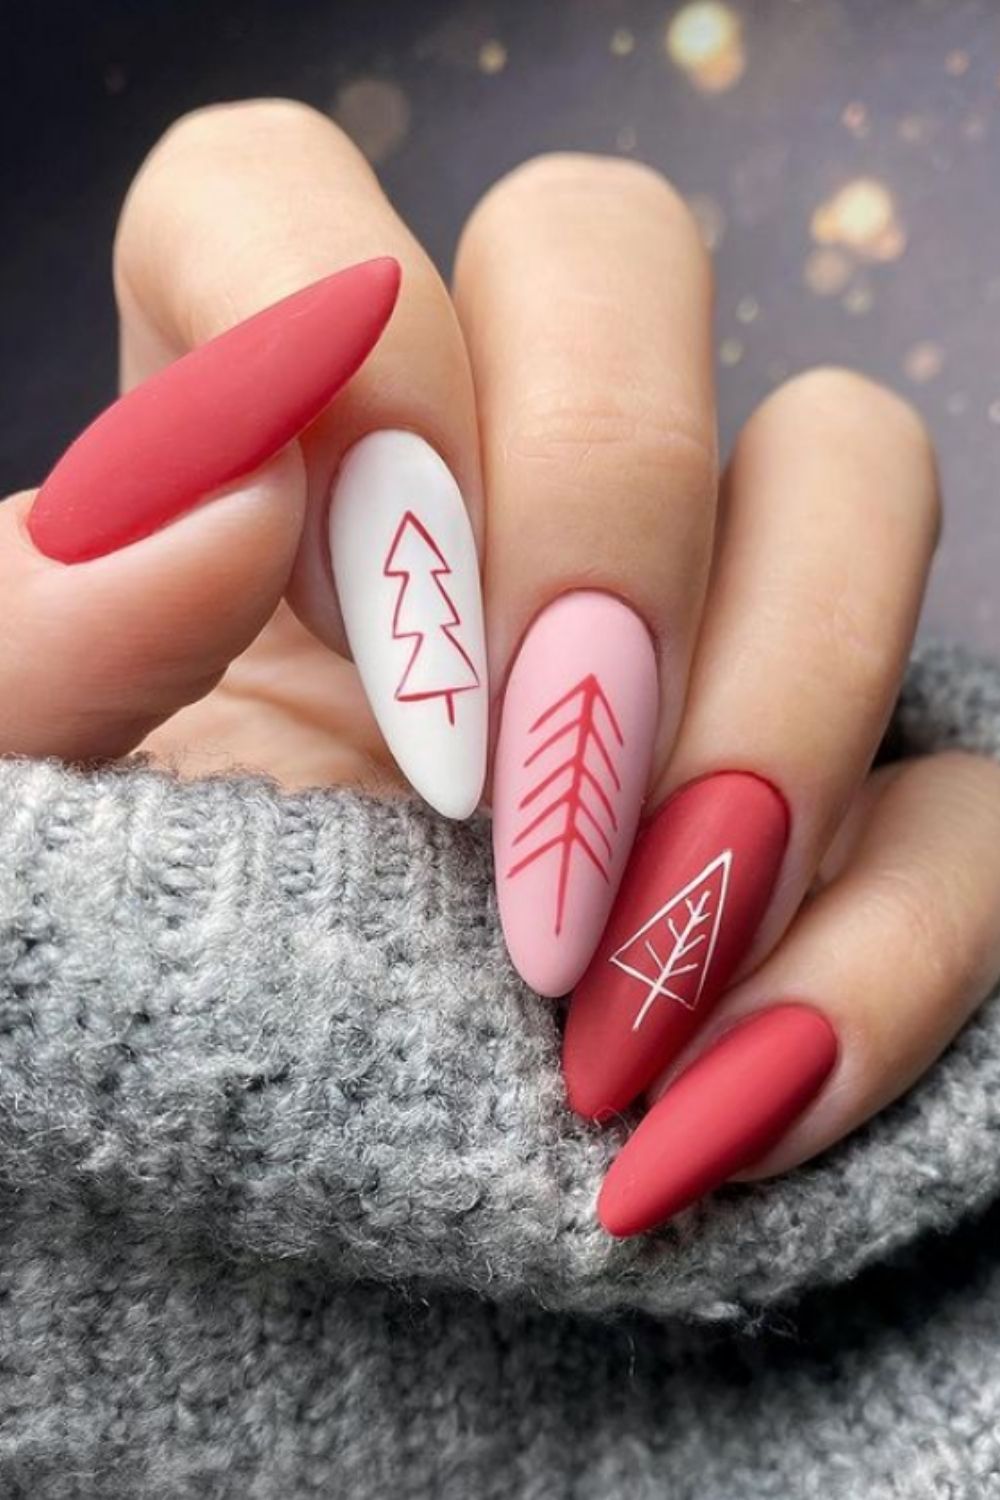 Almond nails art with chritmas tree